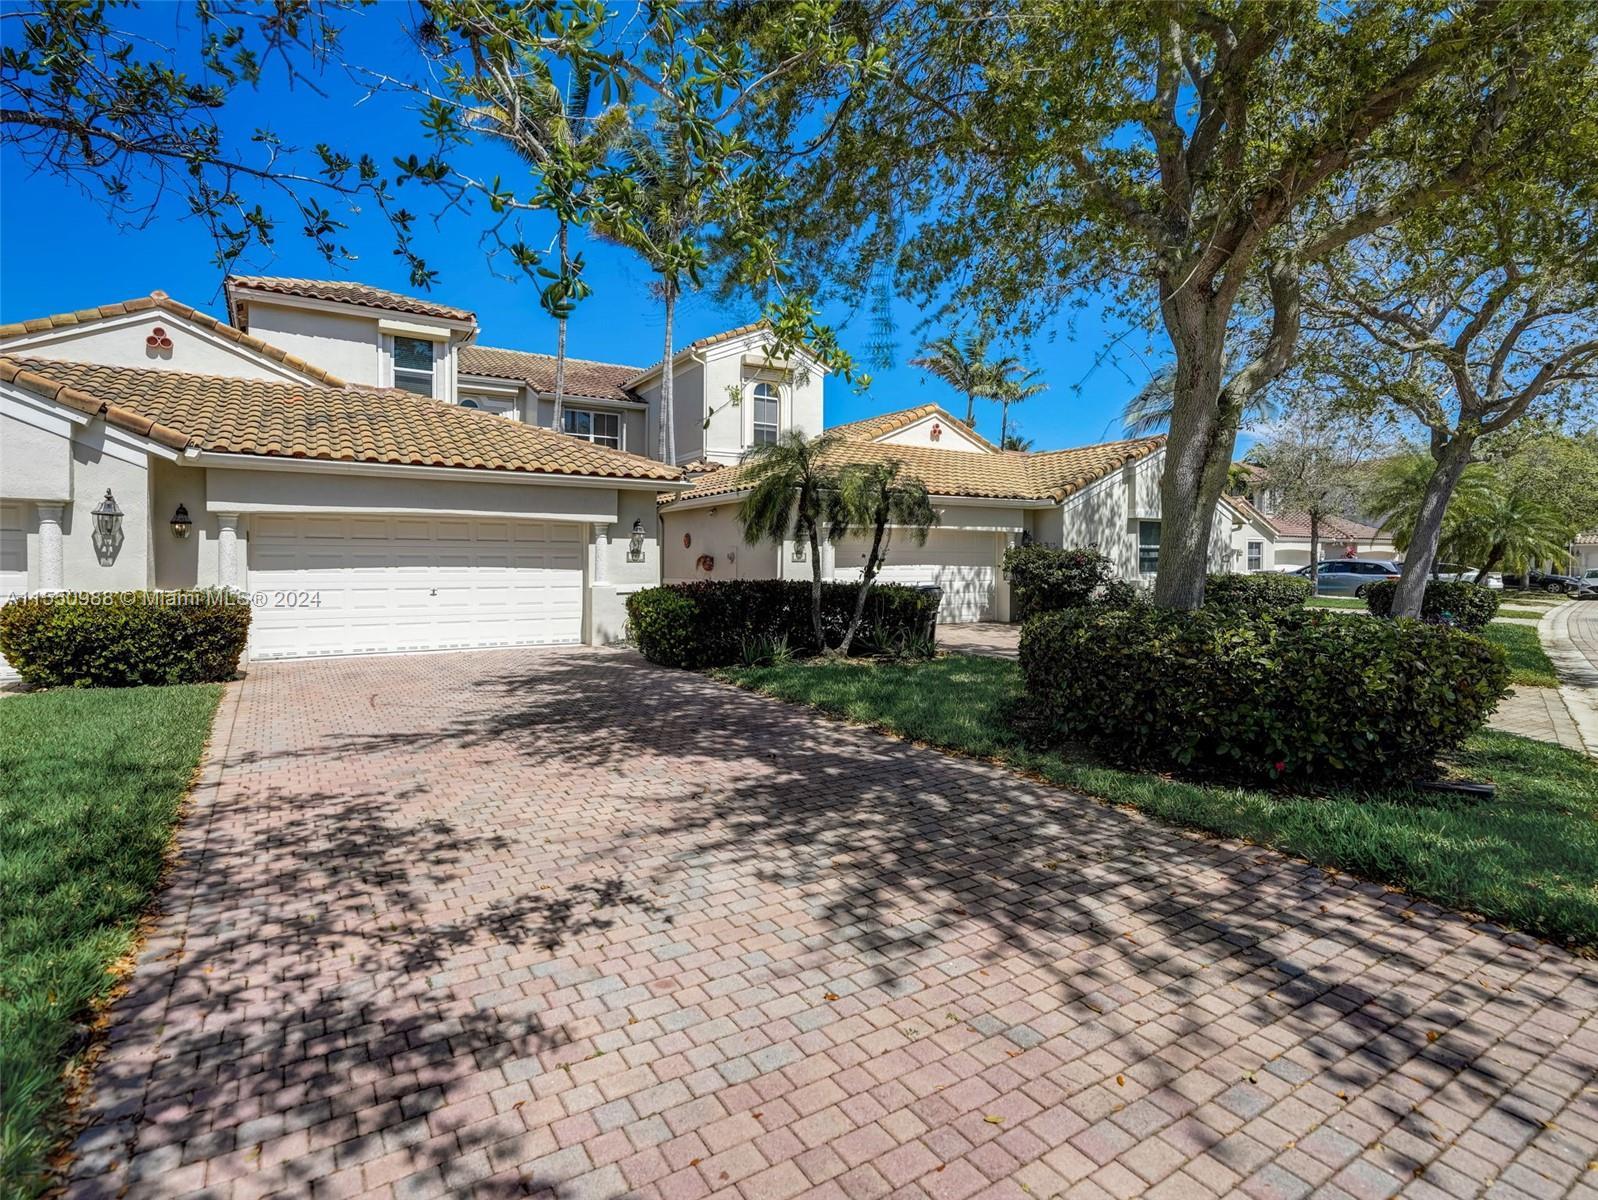 Beautiful 3-bedroom updated townhome in the prestigious gated community of Harbor Islands. This fres